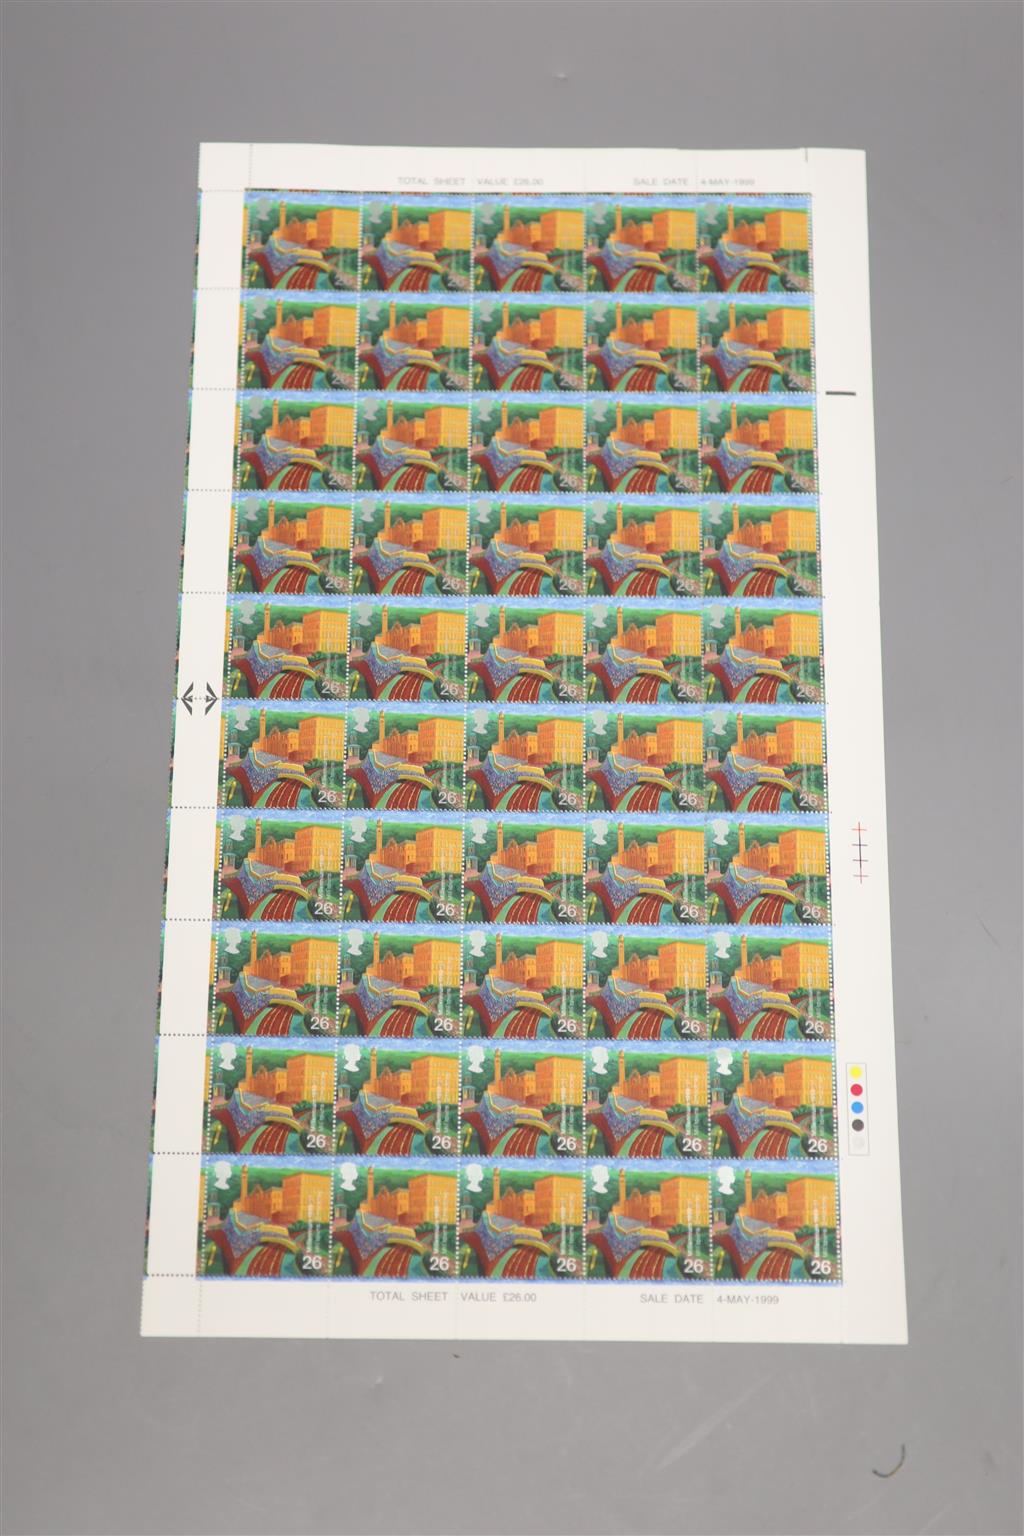 A complete double sheet of DeLaRue British postage stamps,